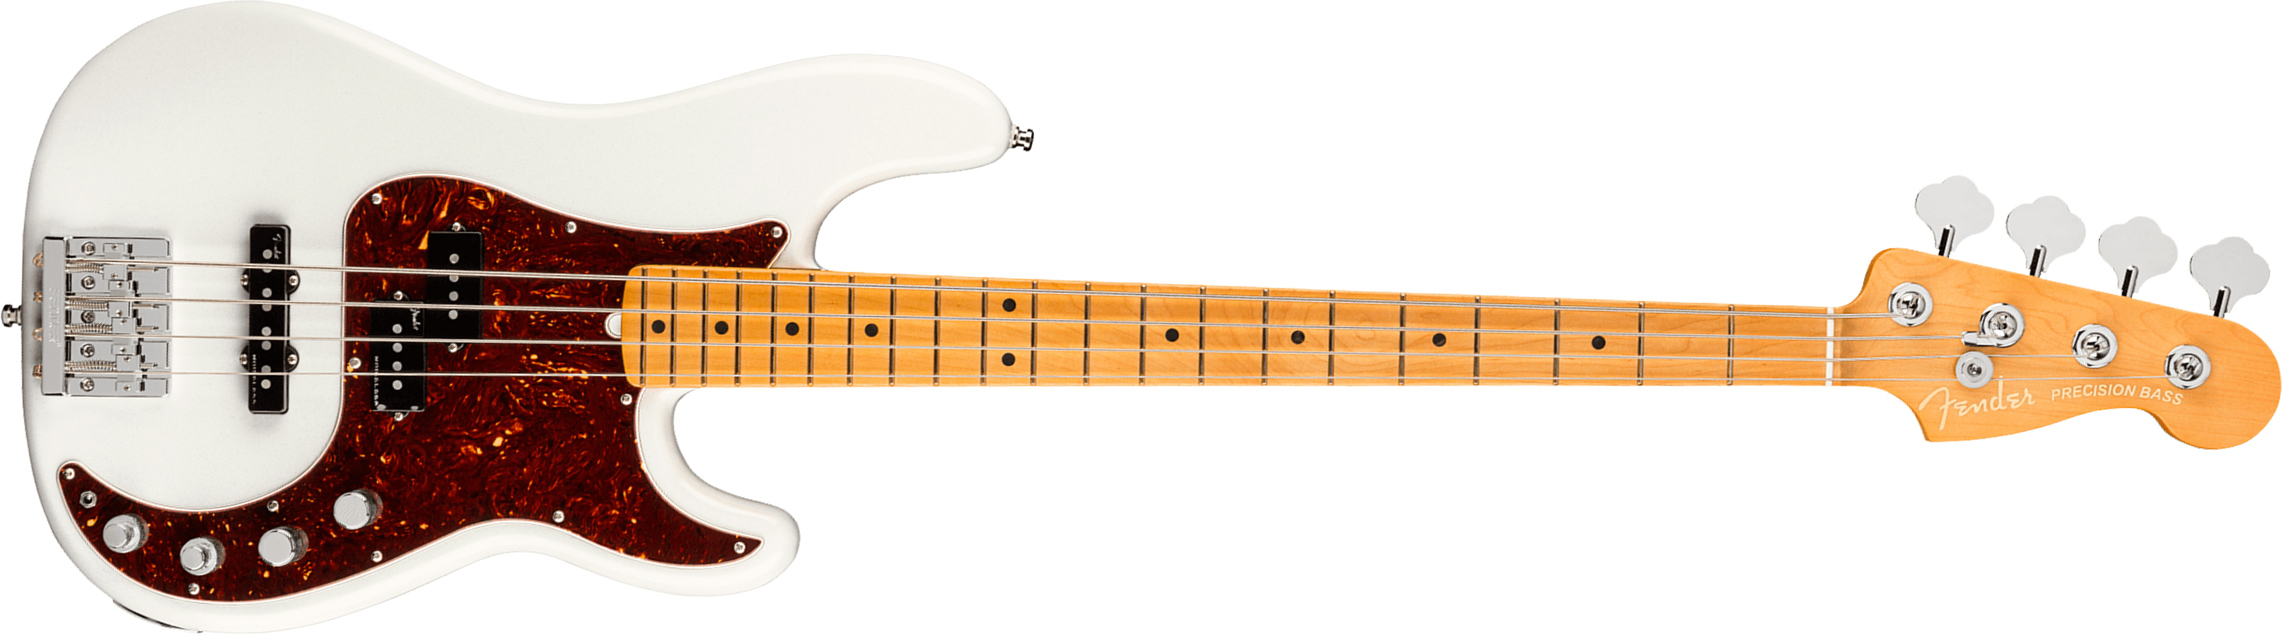 Fender Precision Bass American Ultra 2019 Usa Mn - Arctic Pearl - Basse Électrique Solid Body - Main picture